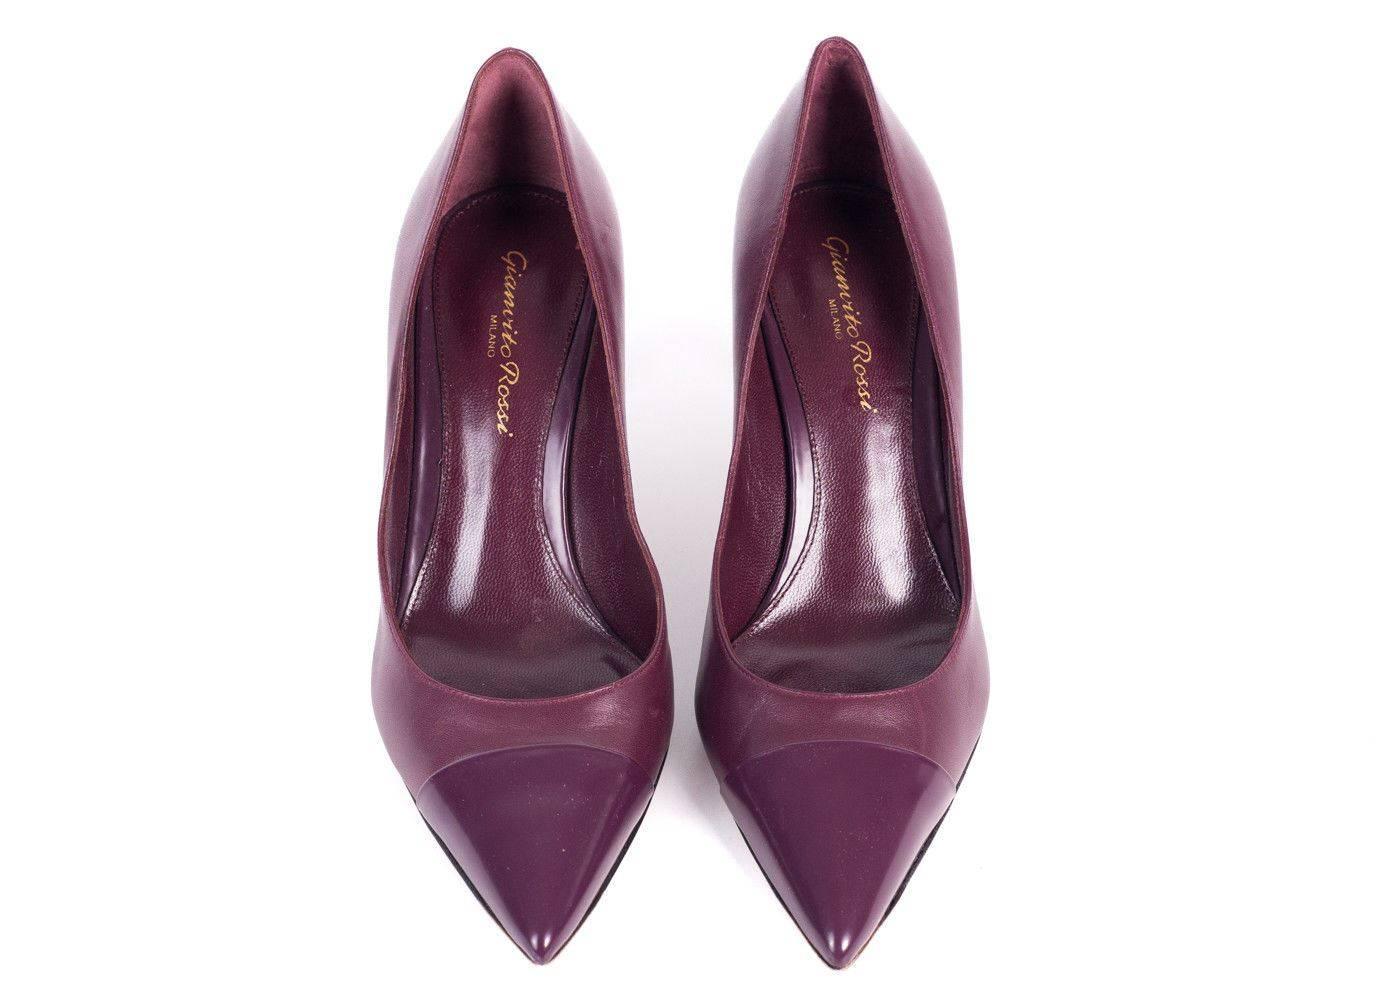 Brand New GIanvito Rossi Classic Pumps
Retails In-Store & Online for $675
Size IT37 / US 7

Gianvito Rossi continues to bridge Italian glamour and high-end craftsmanship with a modern aesthetic for your everyday wear. Featuring a slightly contrasted